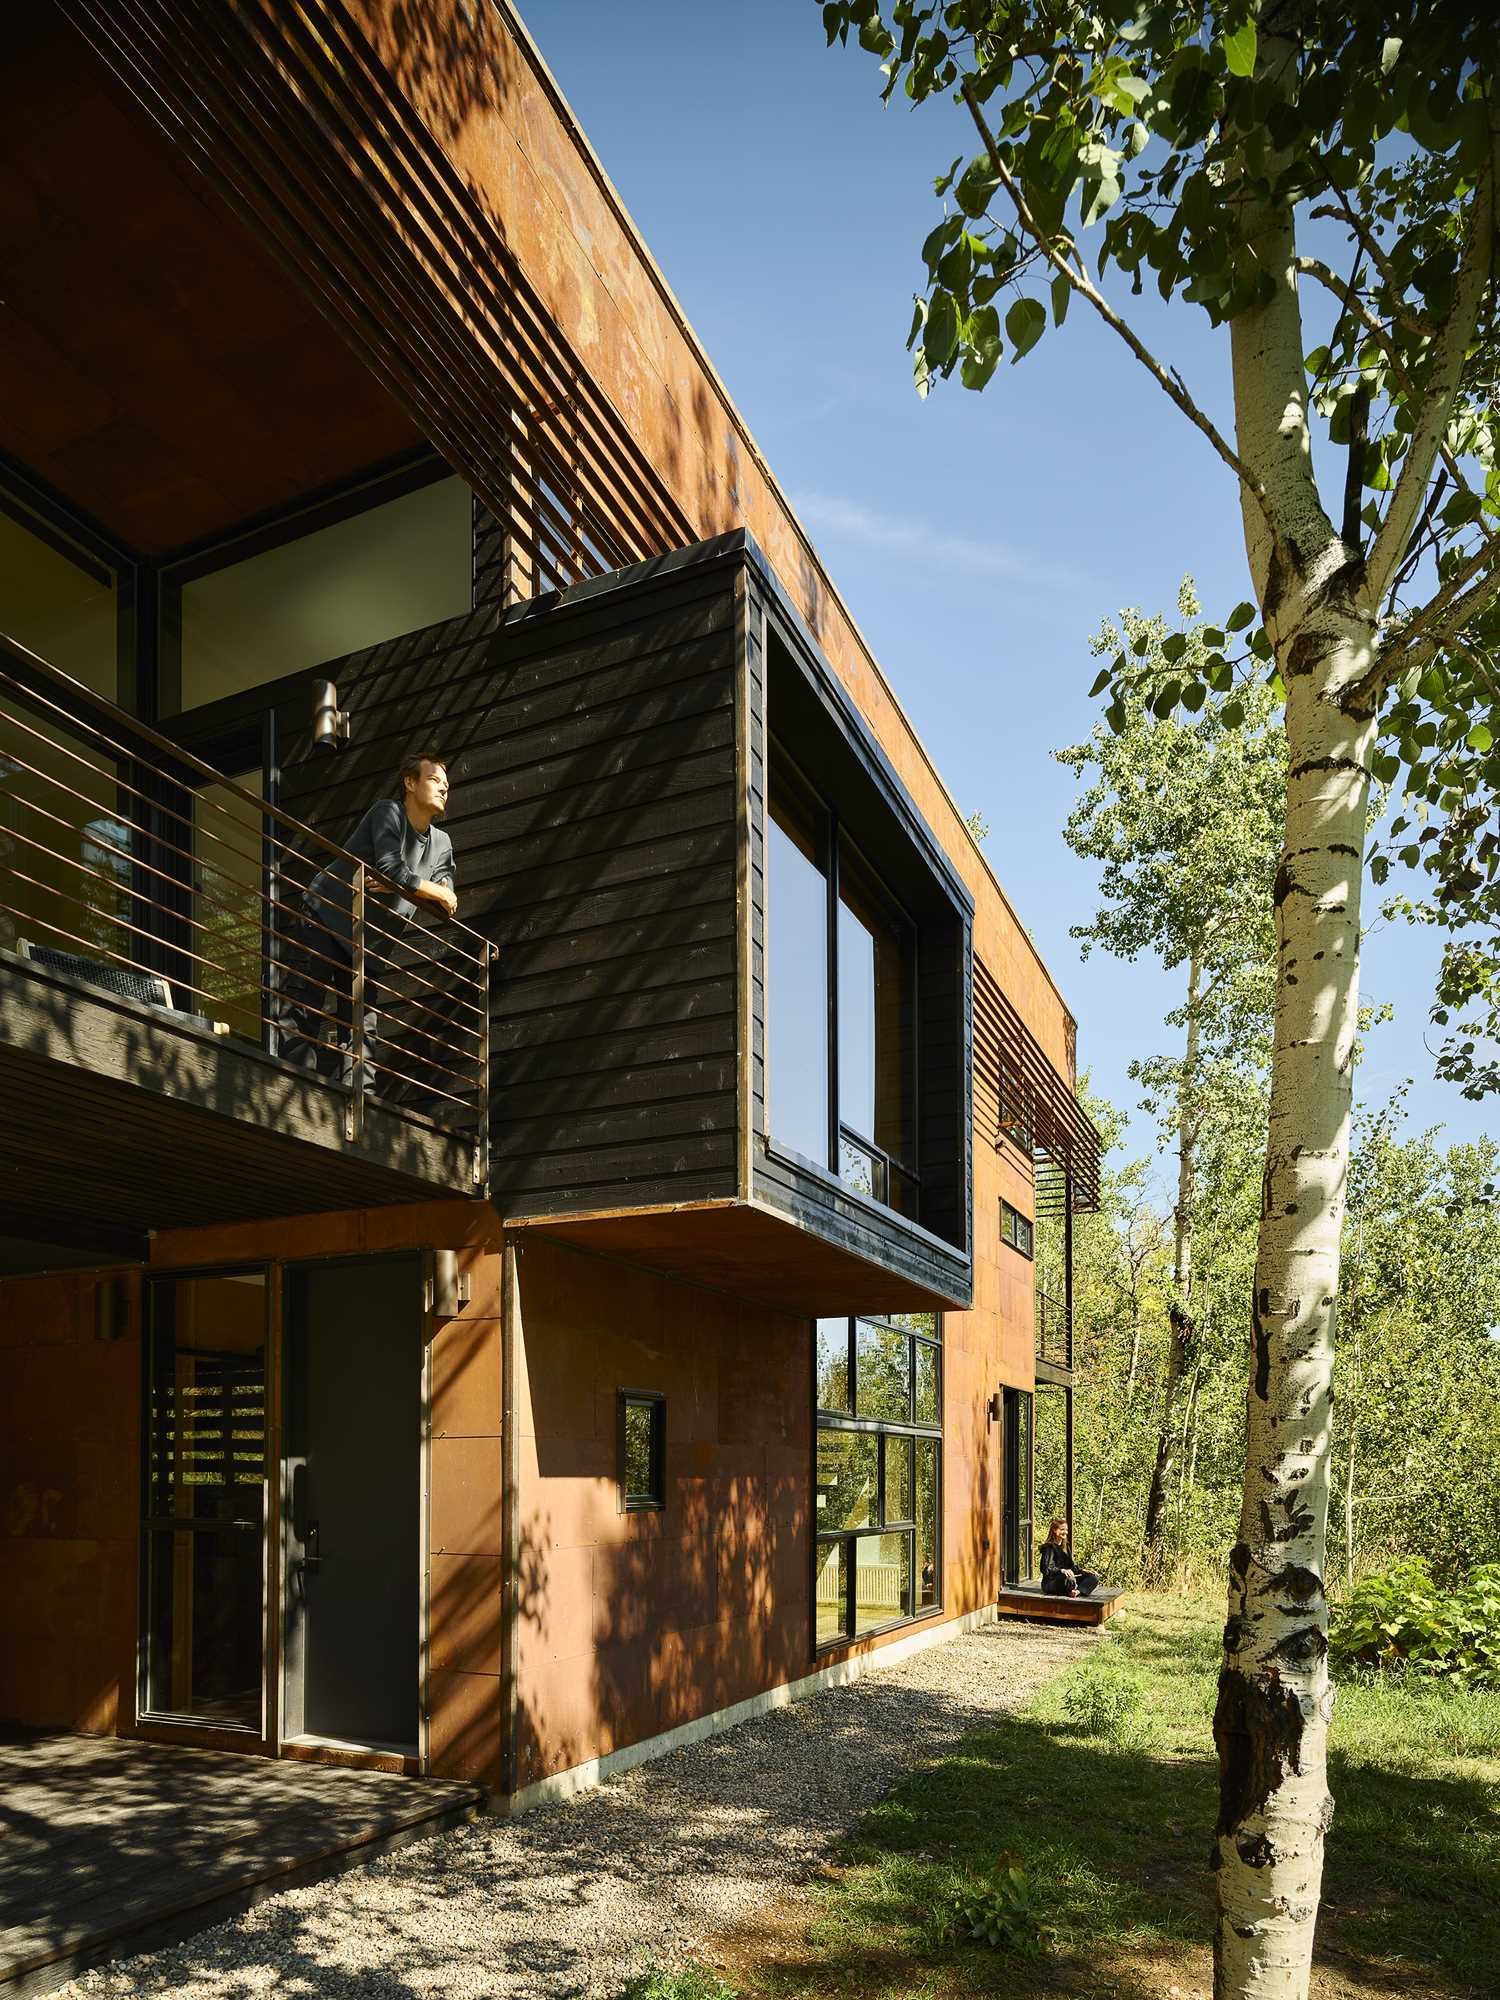 A cantilevered, cedar-clad projection from the second level expands the living spaces inside and adds visual interest to the exterior of the home.